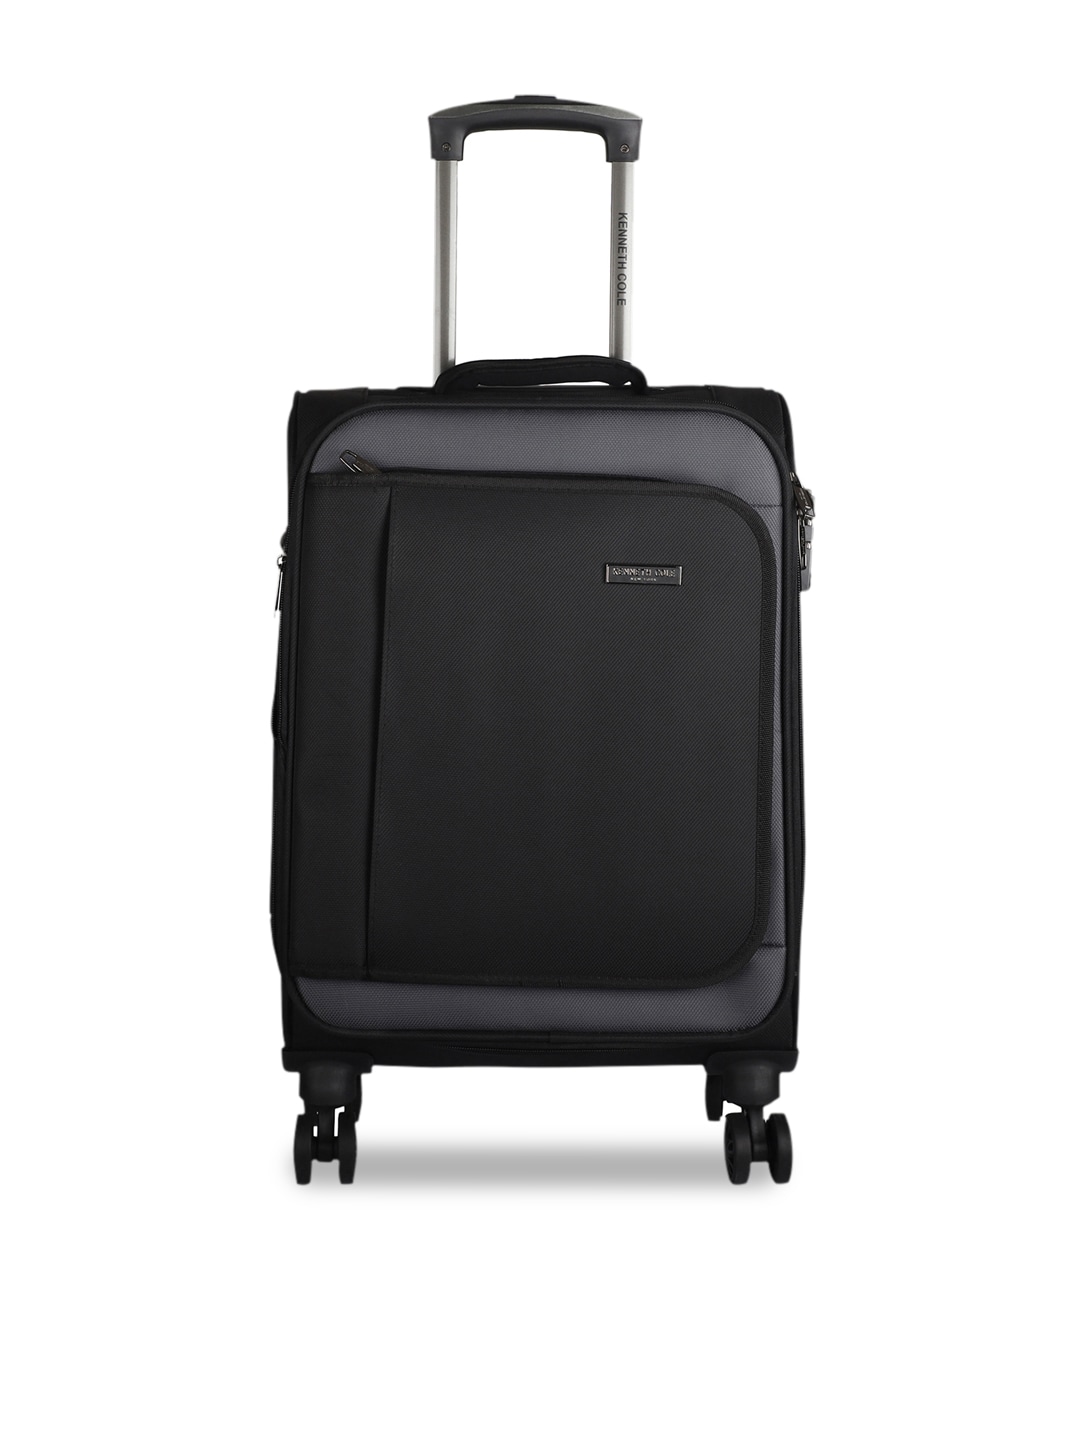 Kenneth Cole Black Solid Medium Trolley Bag Price in India